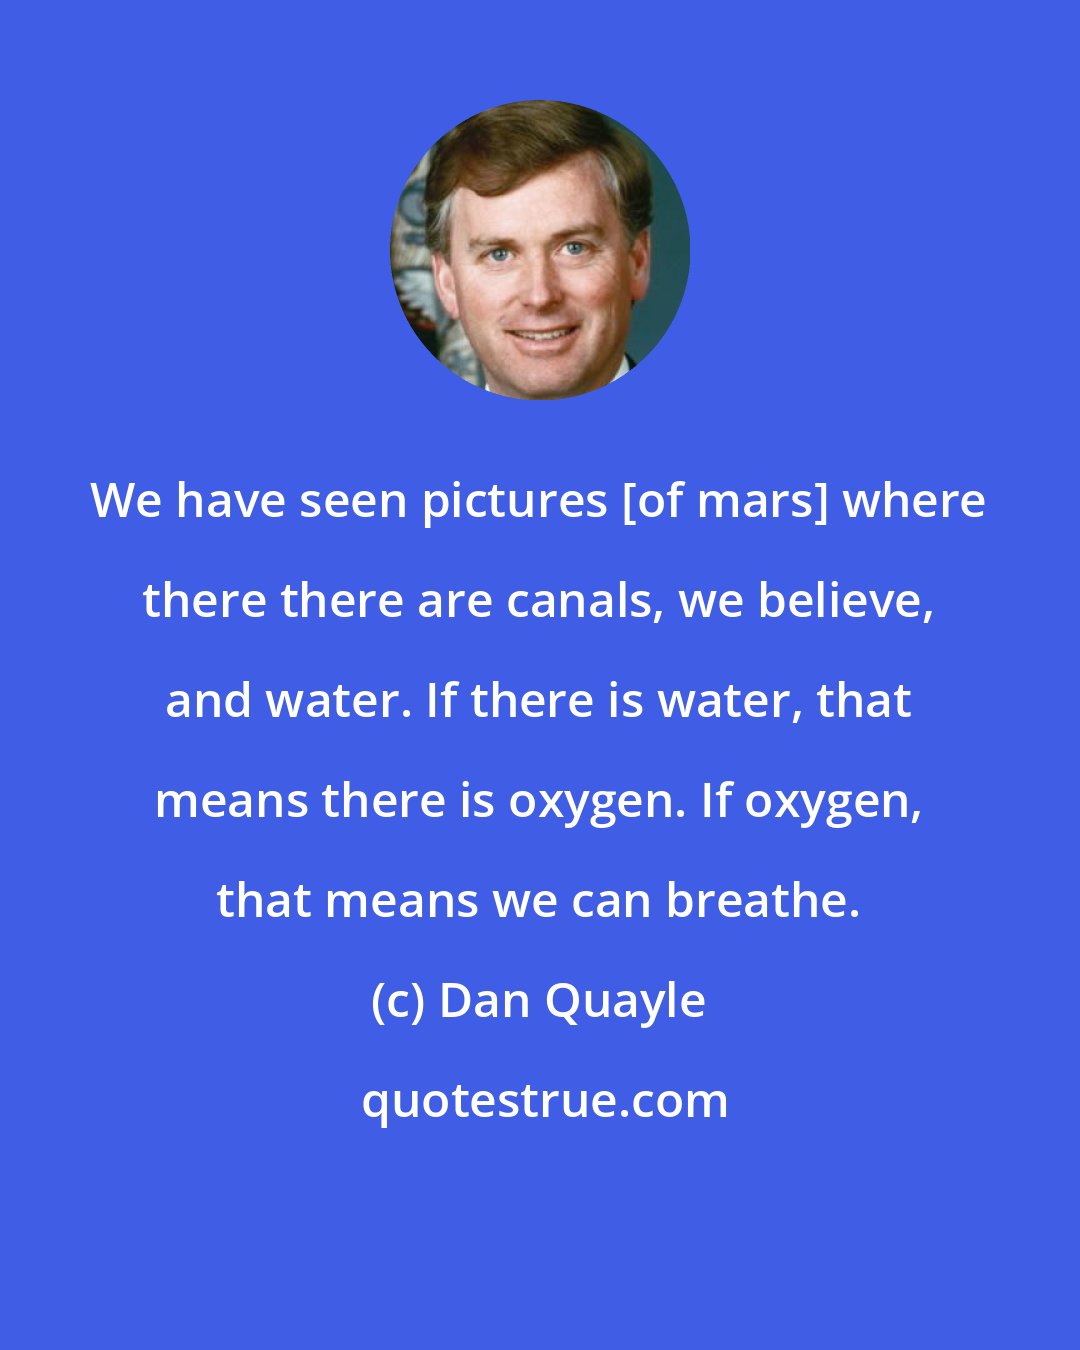 Dan Quayle: We have seen pictures [of mars] where there there are canals, we believe, and water. If there is water, that means there is oxygen. If oxygen, that means we can breathe.